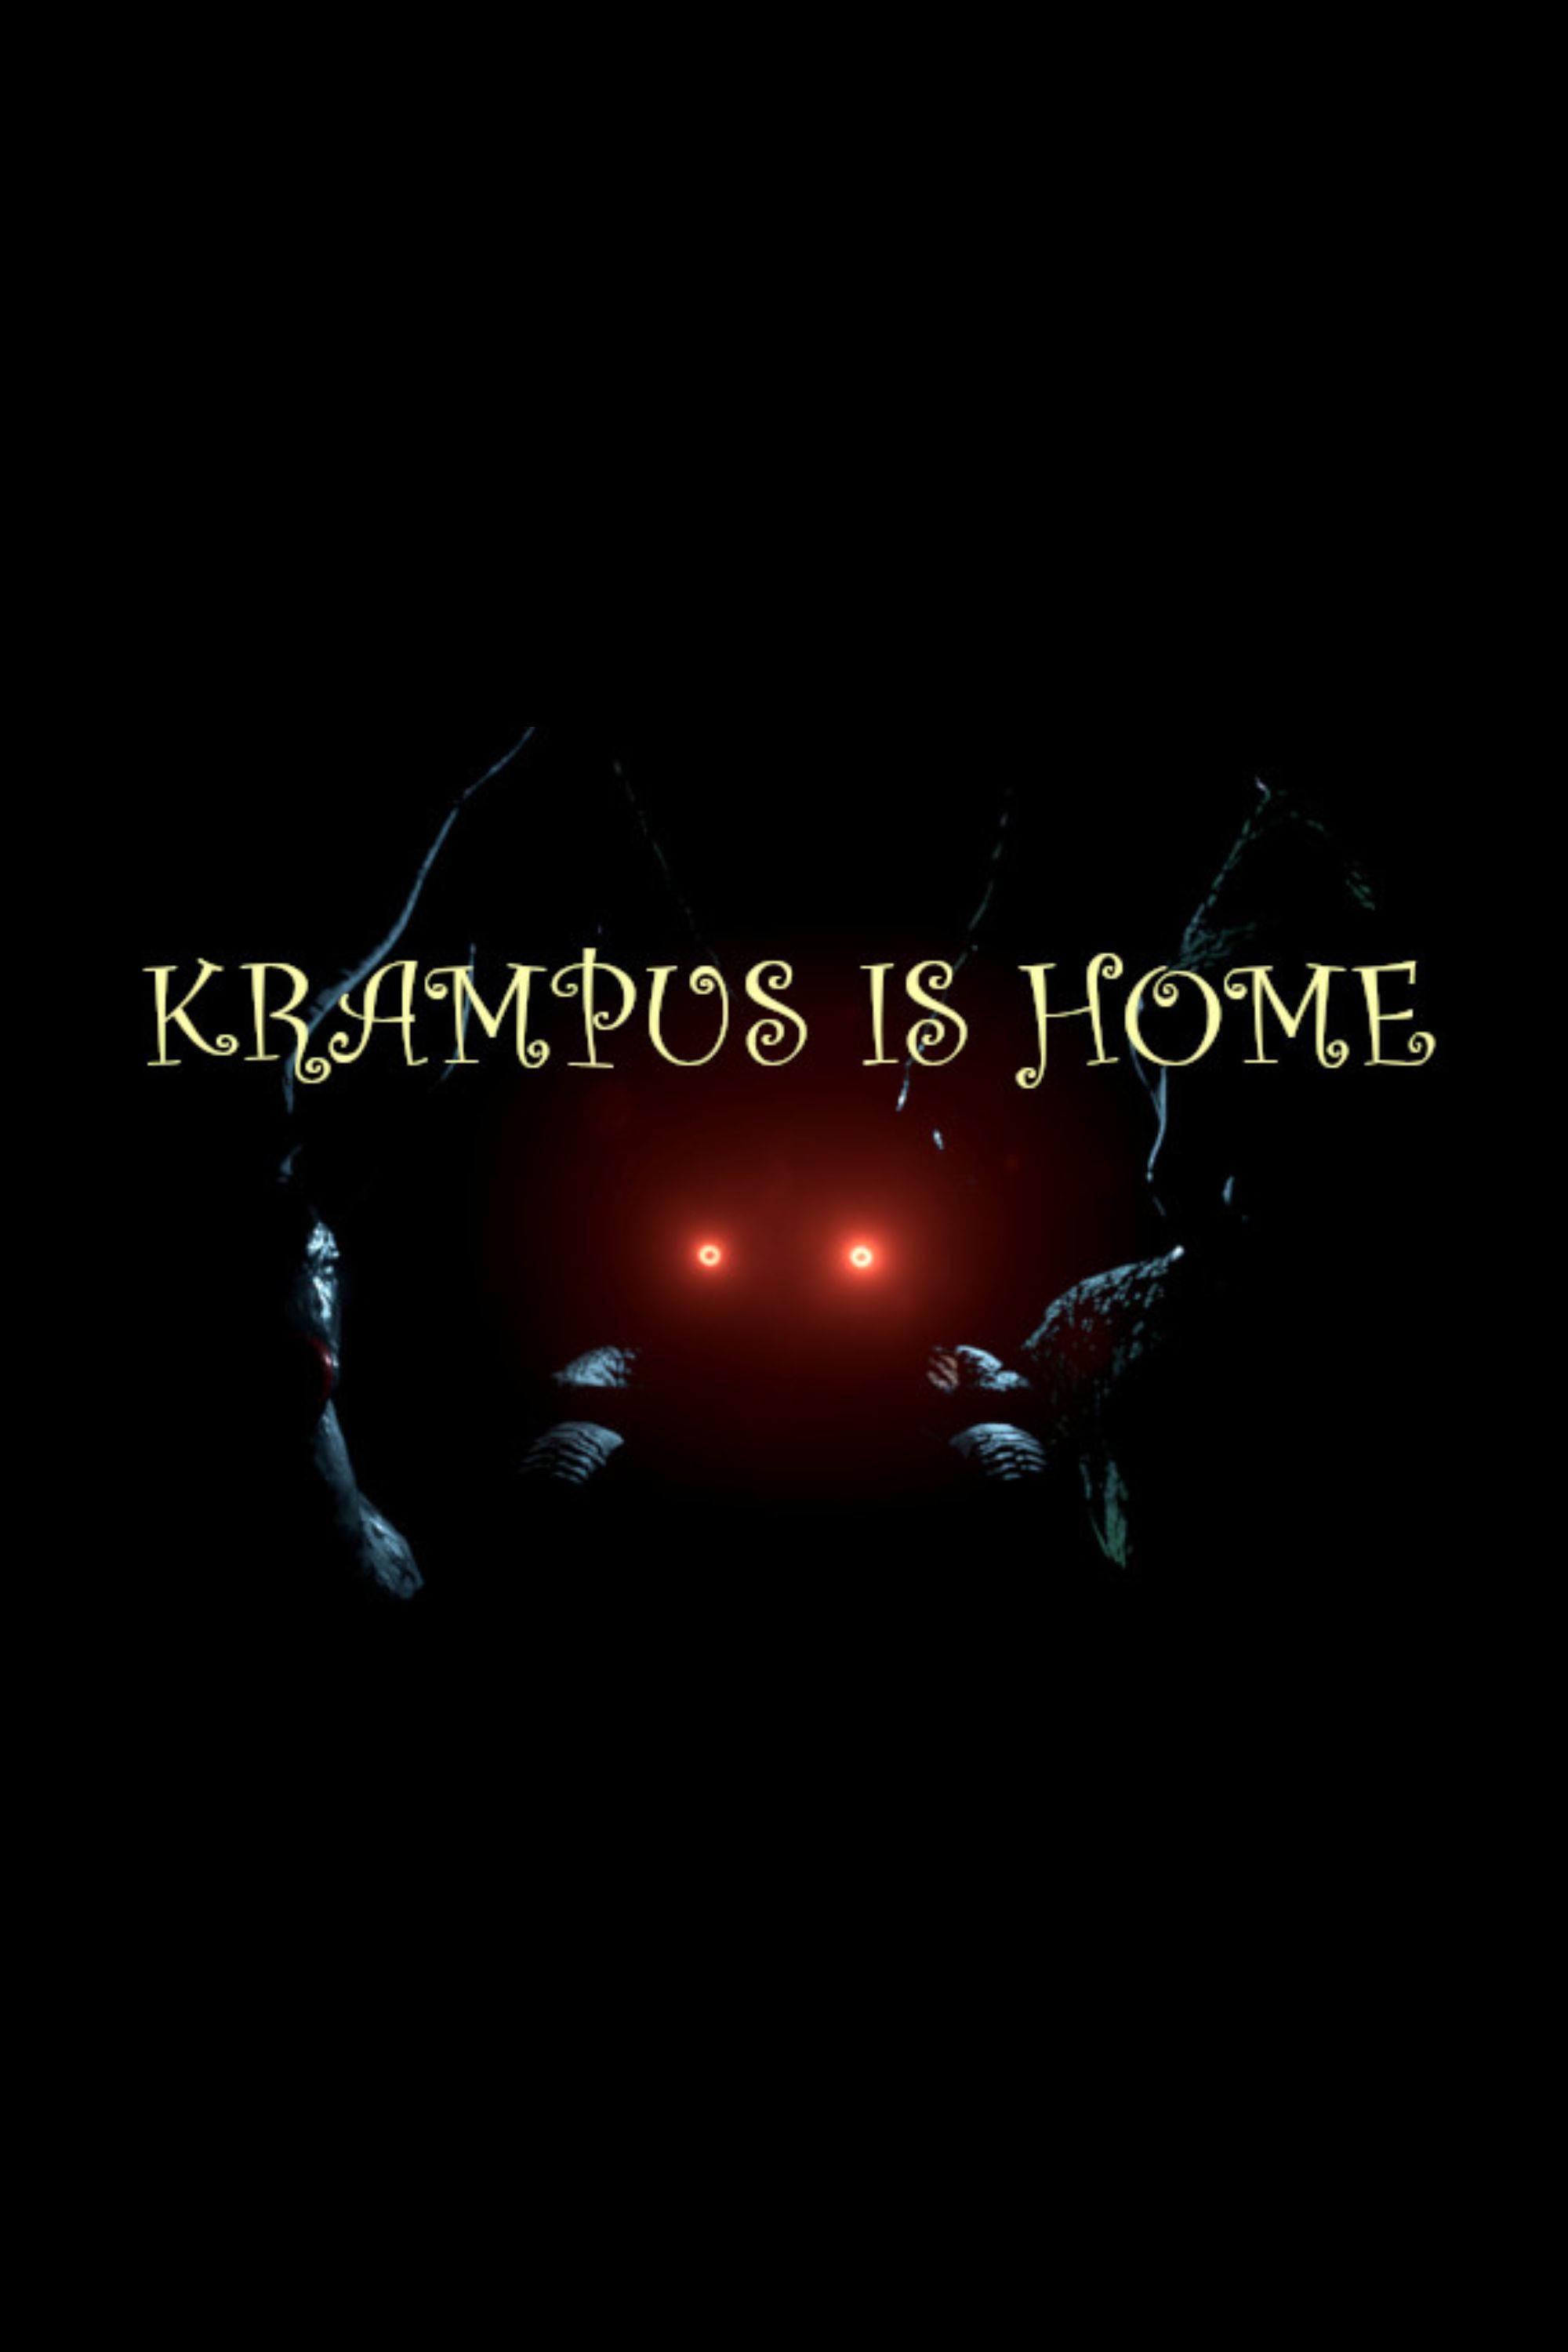 Cover image for Krampus is home showing a monster with glowing red eyes behind the logo